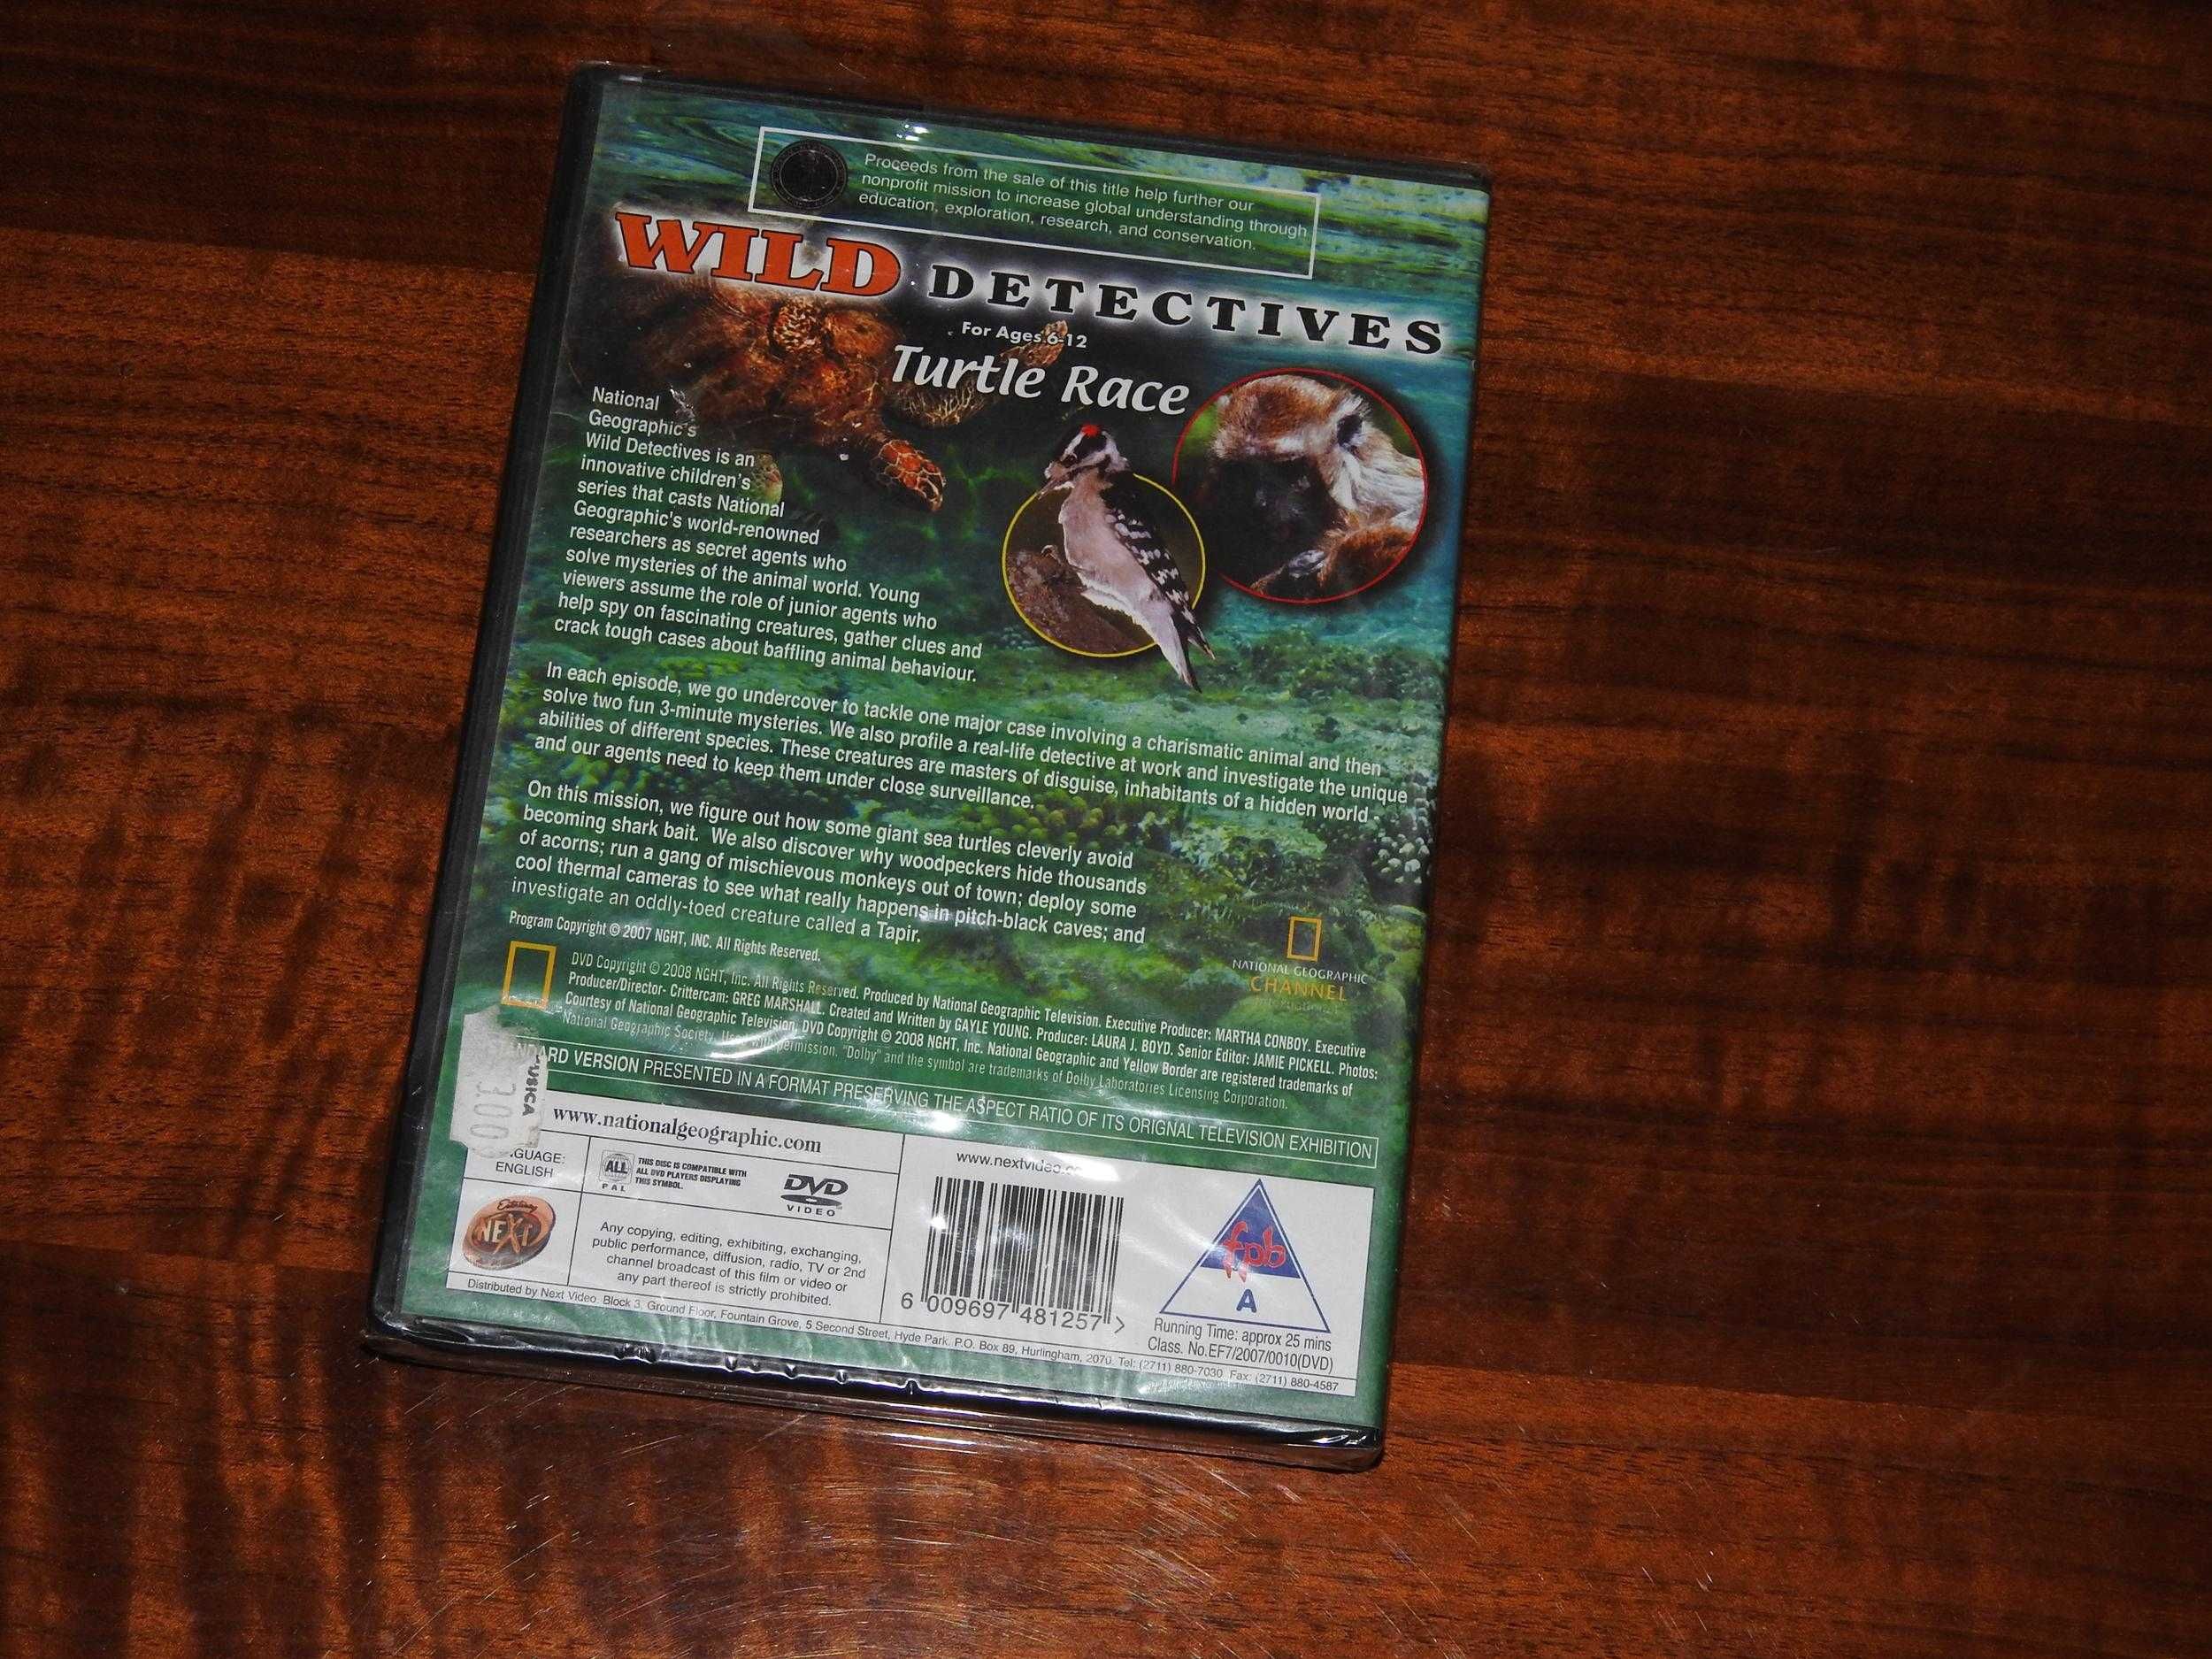 National Geographic Kids - Wild Detectives Turtle Race DVD